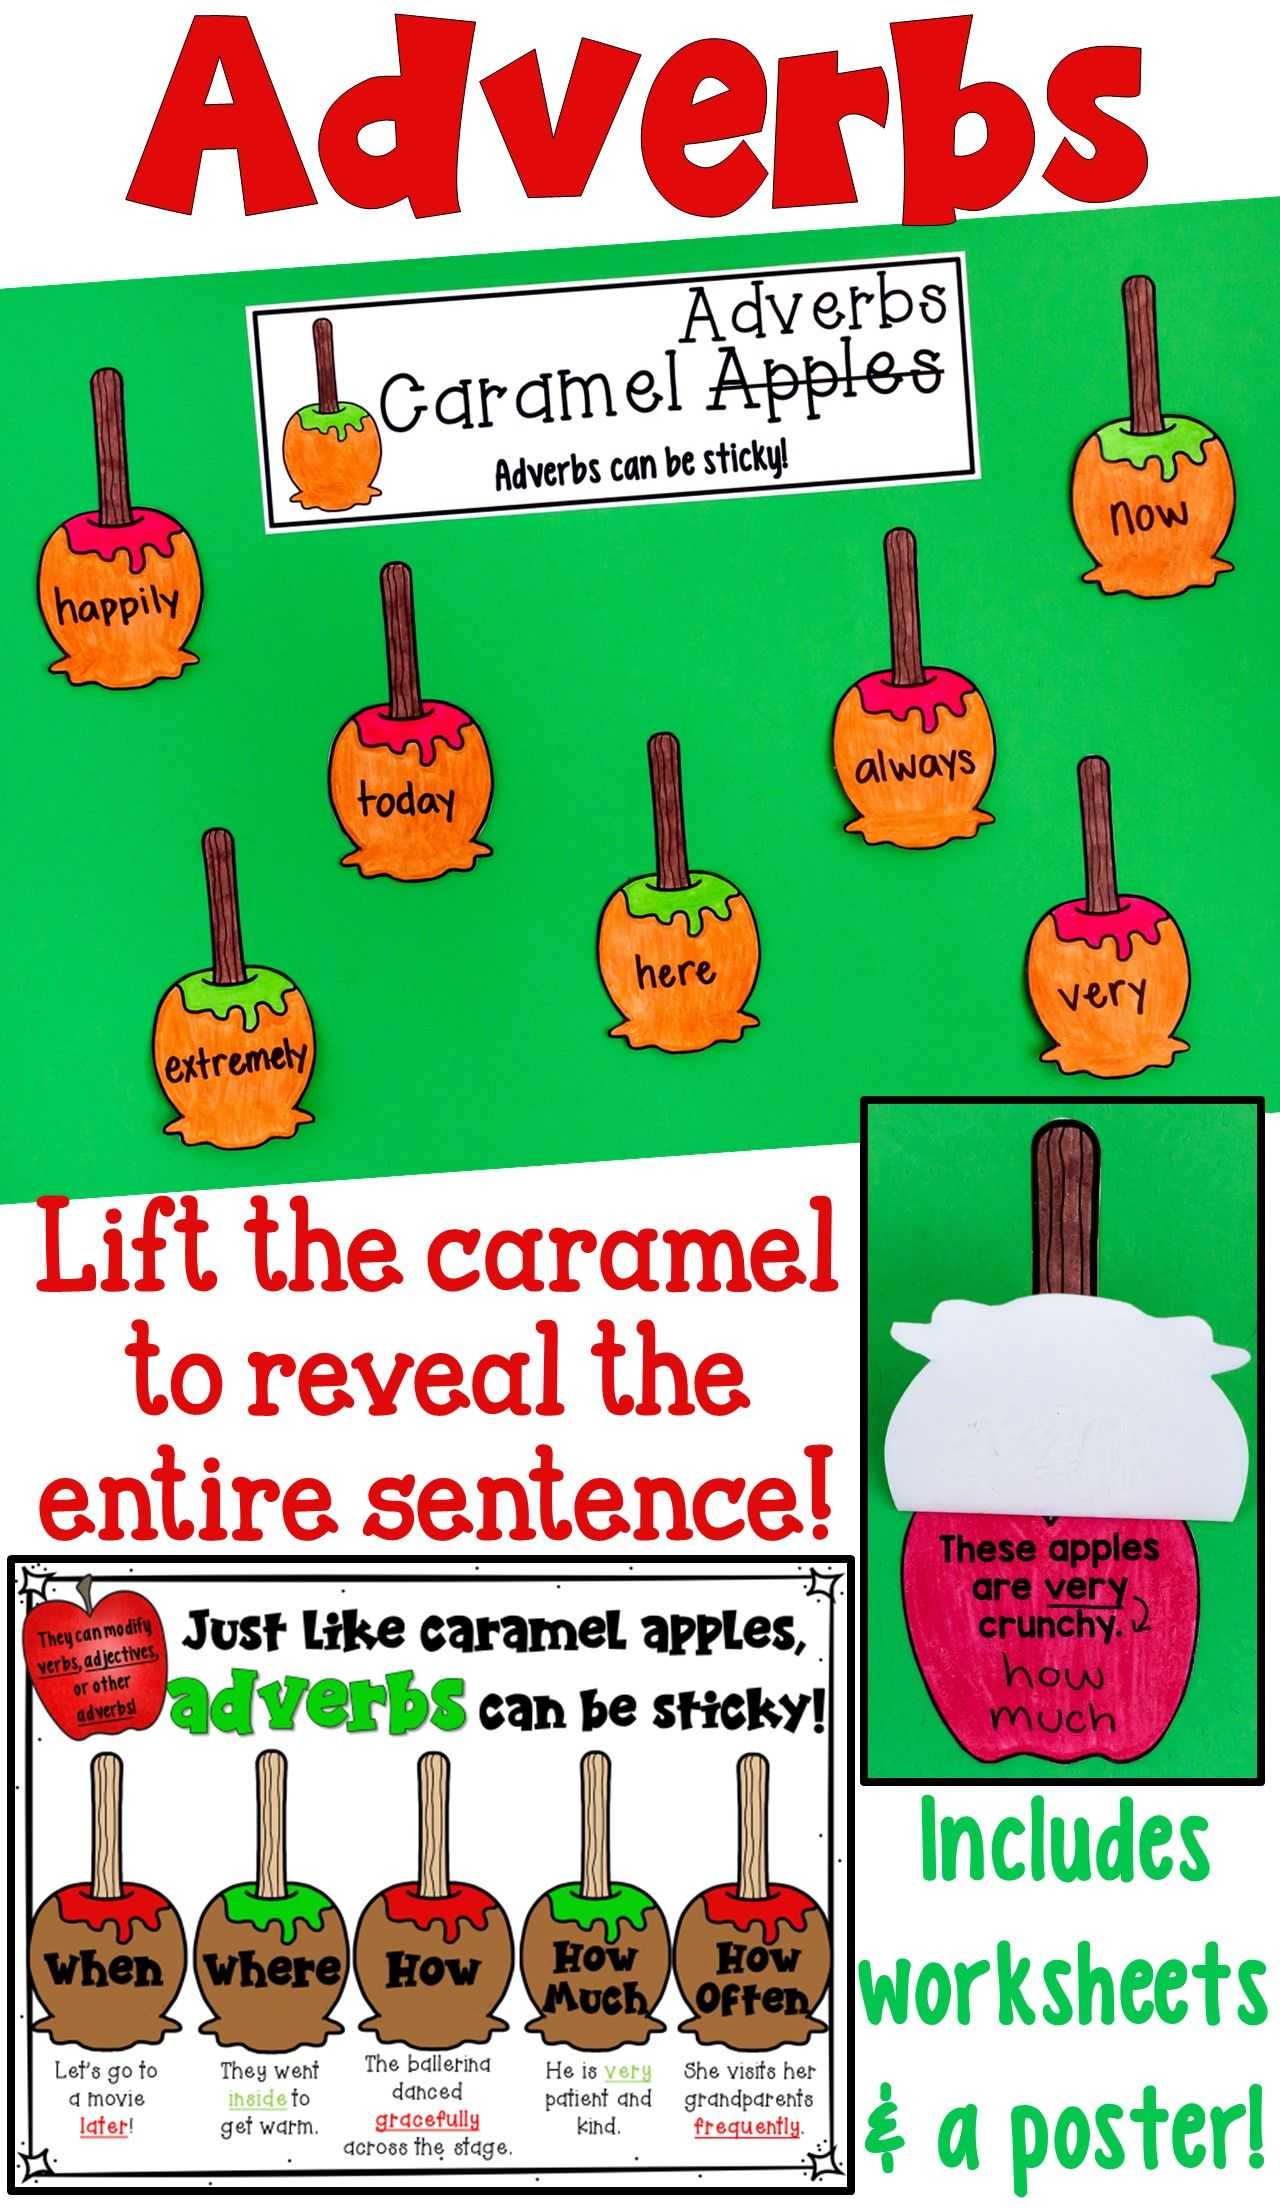 Adverb Practice Worksheets Along with Adverbs Craftivity Poster and Worksheet